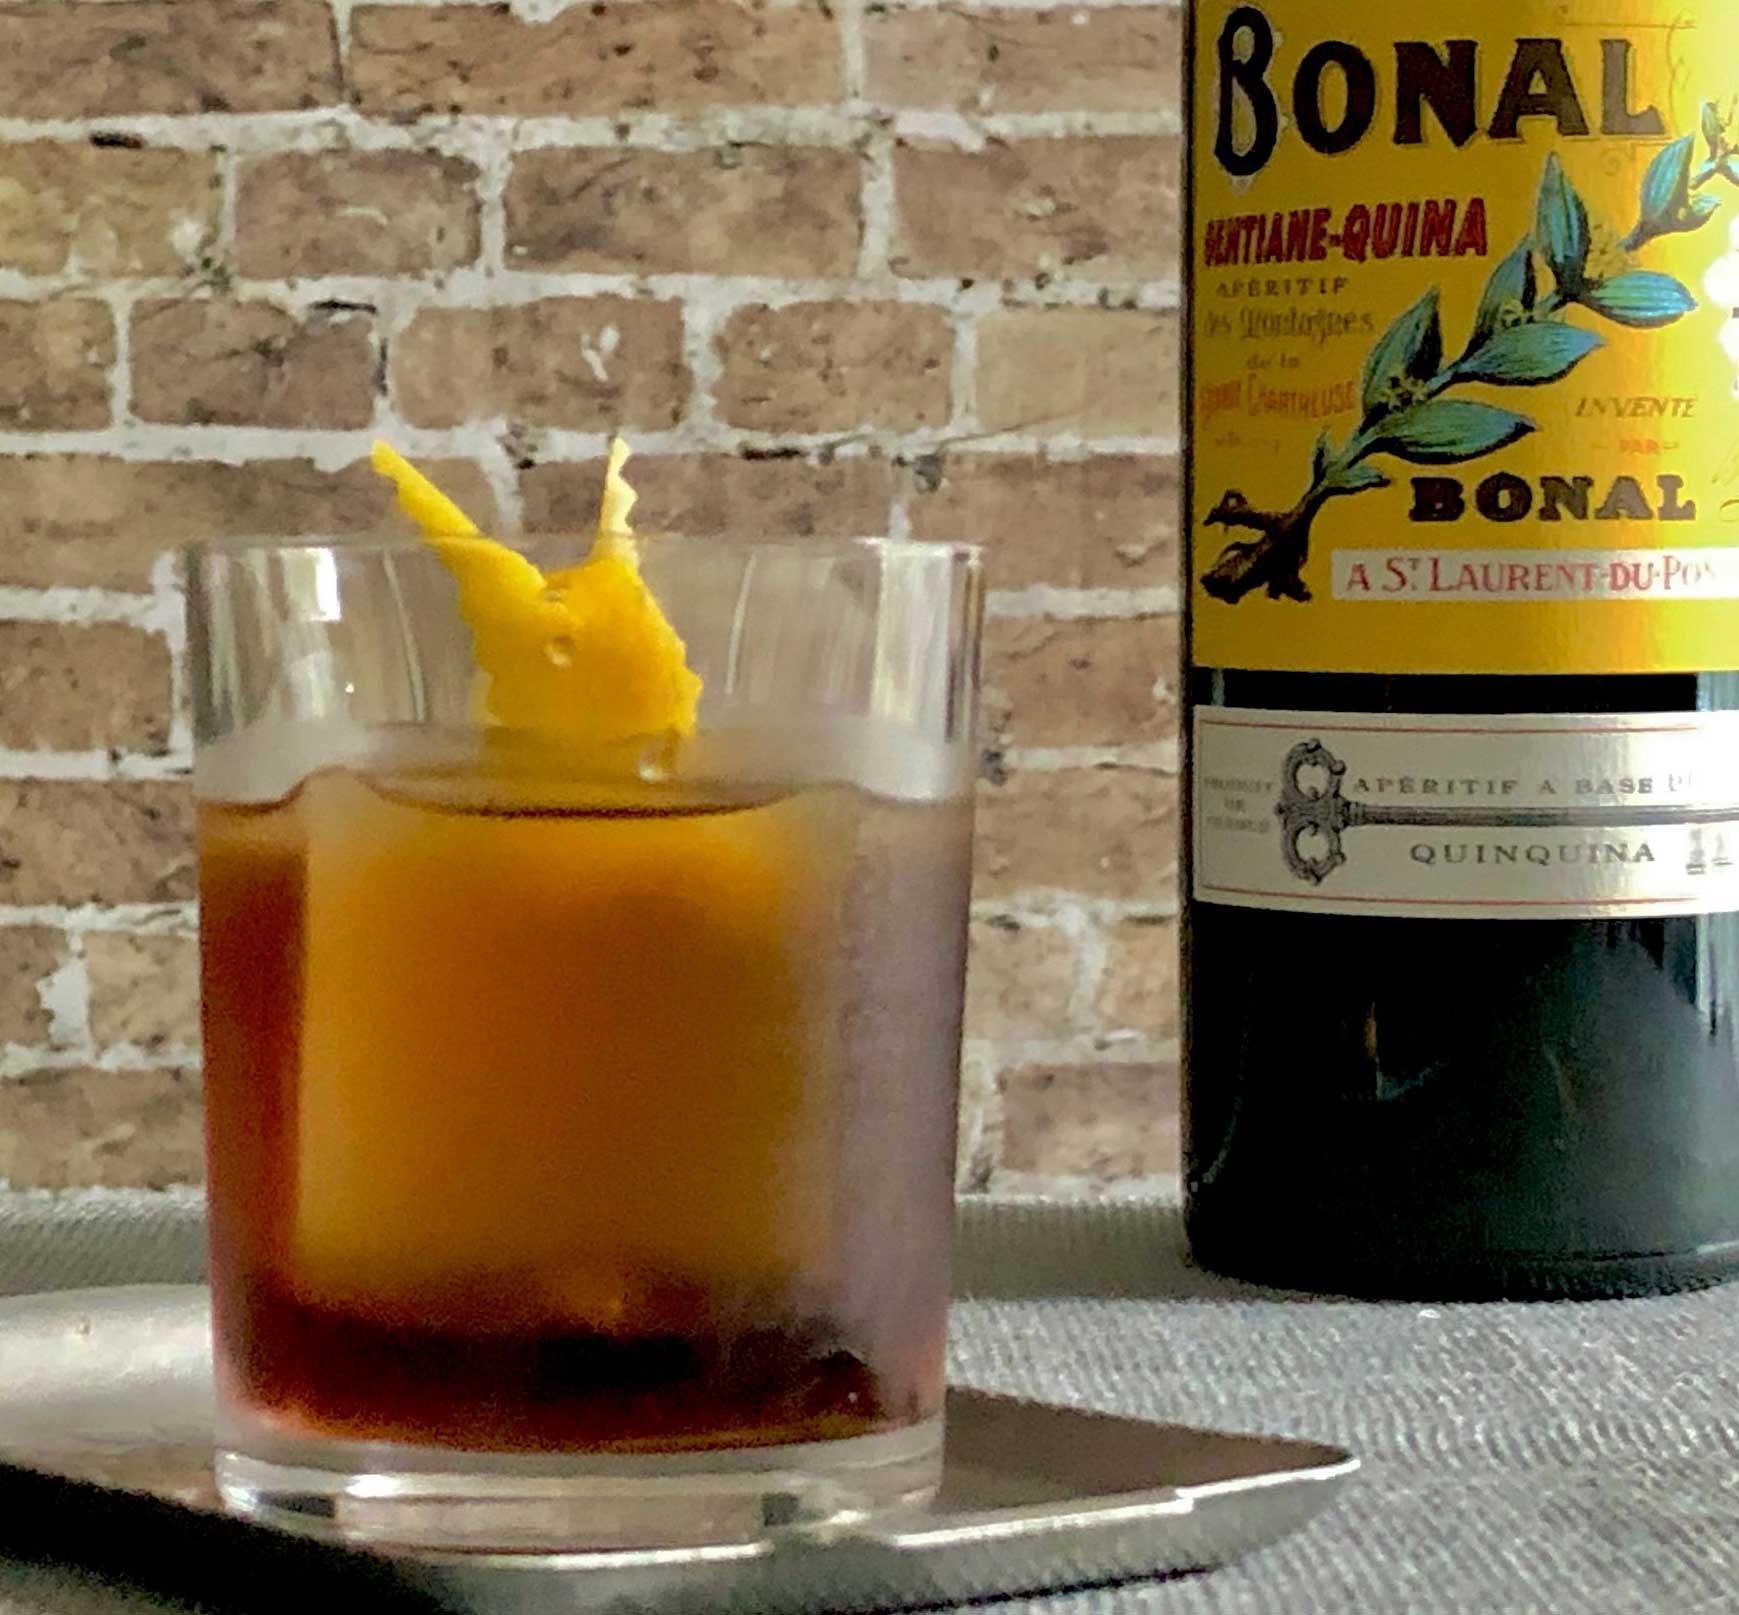 An example of the Tif & Tivo, the mixed drink (drink), by Rhiannon Enlil, New Orleans, featuring Bonal Gentiane-Quina, Cocchi Americano Bianco, and lemon twist; photo by Lee Edwards